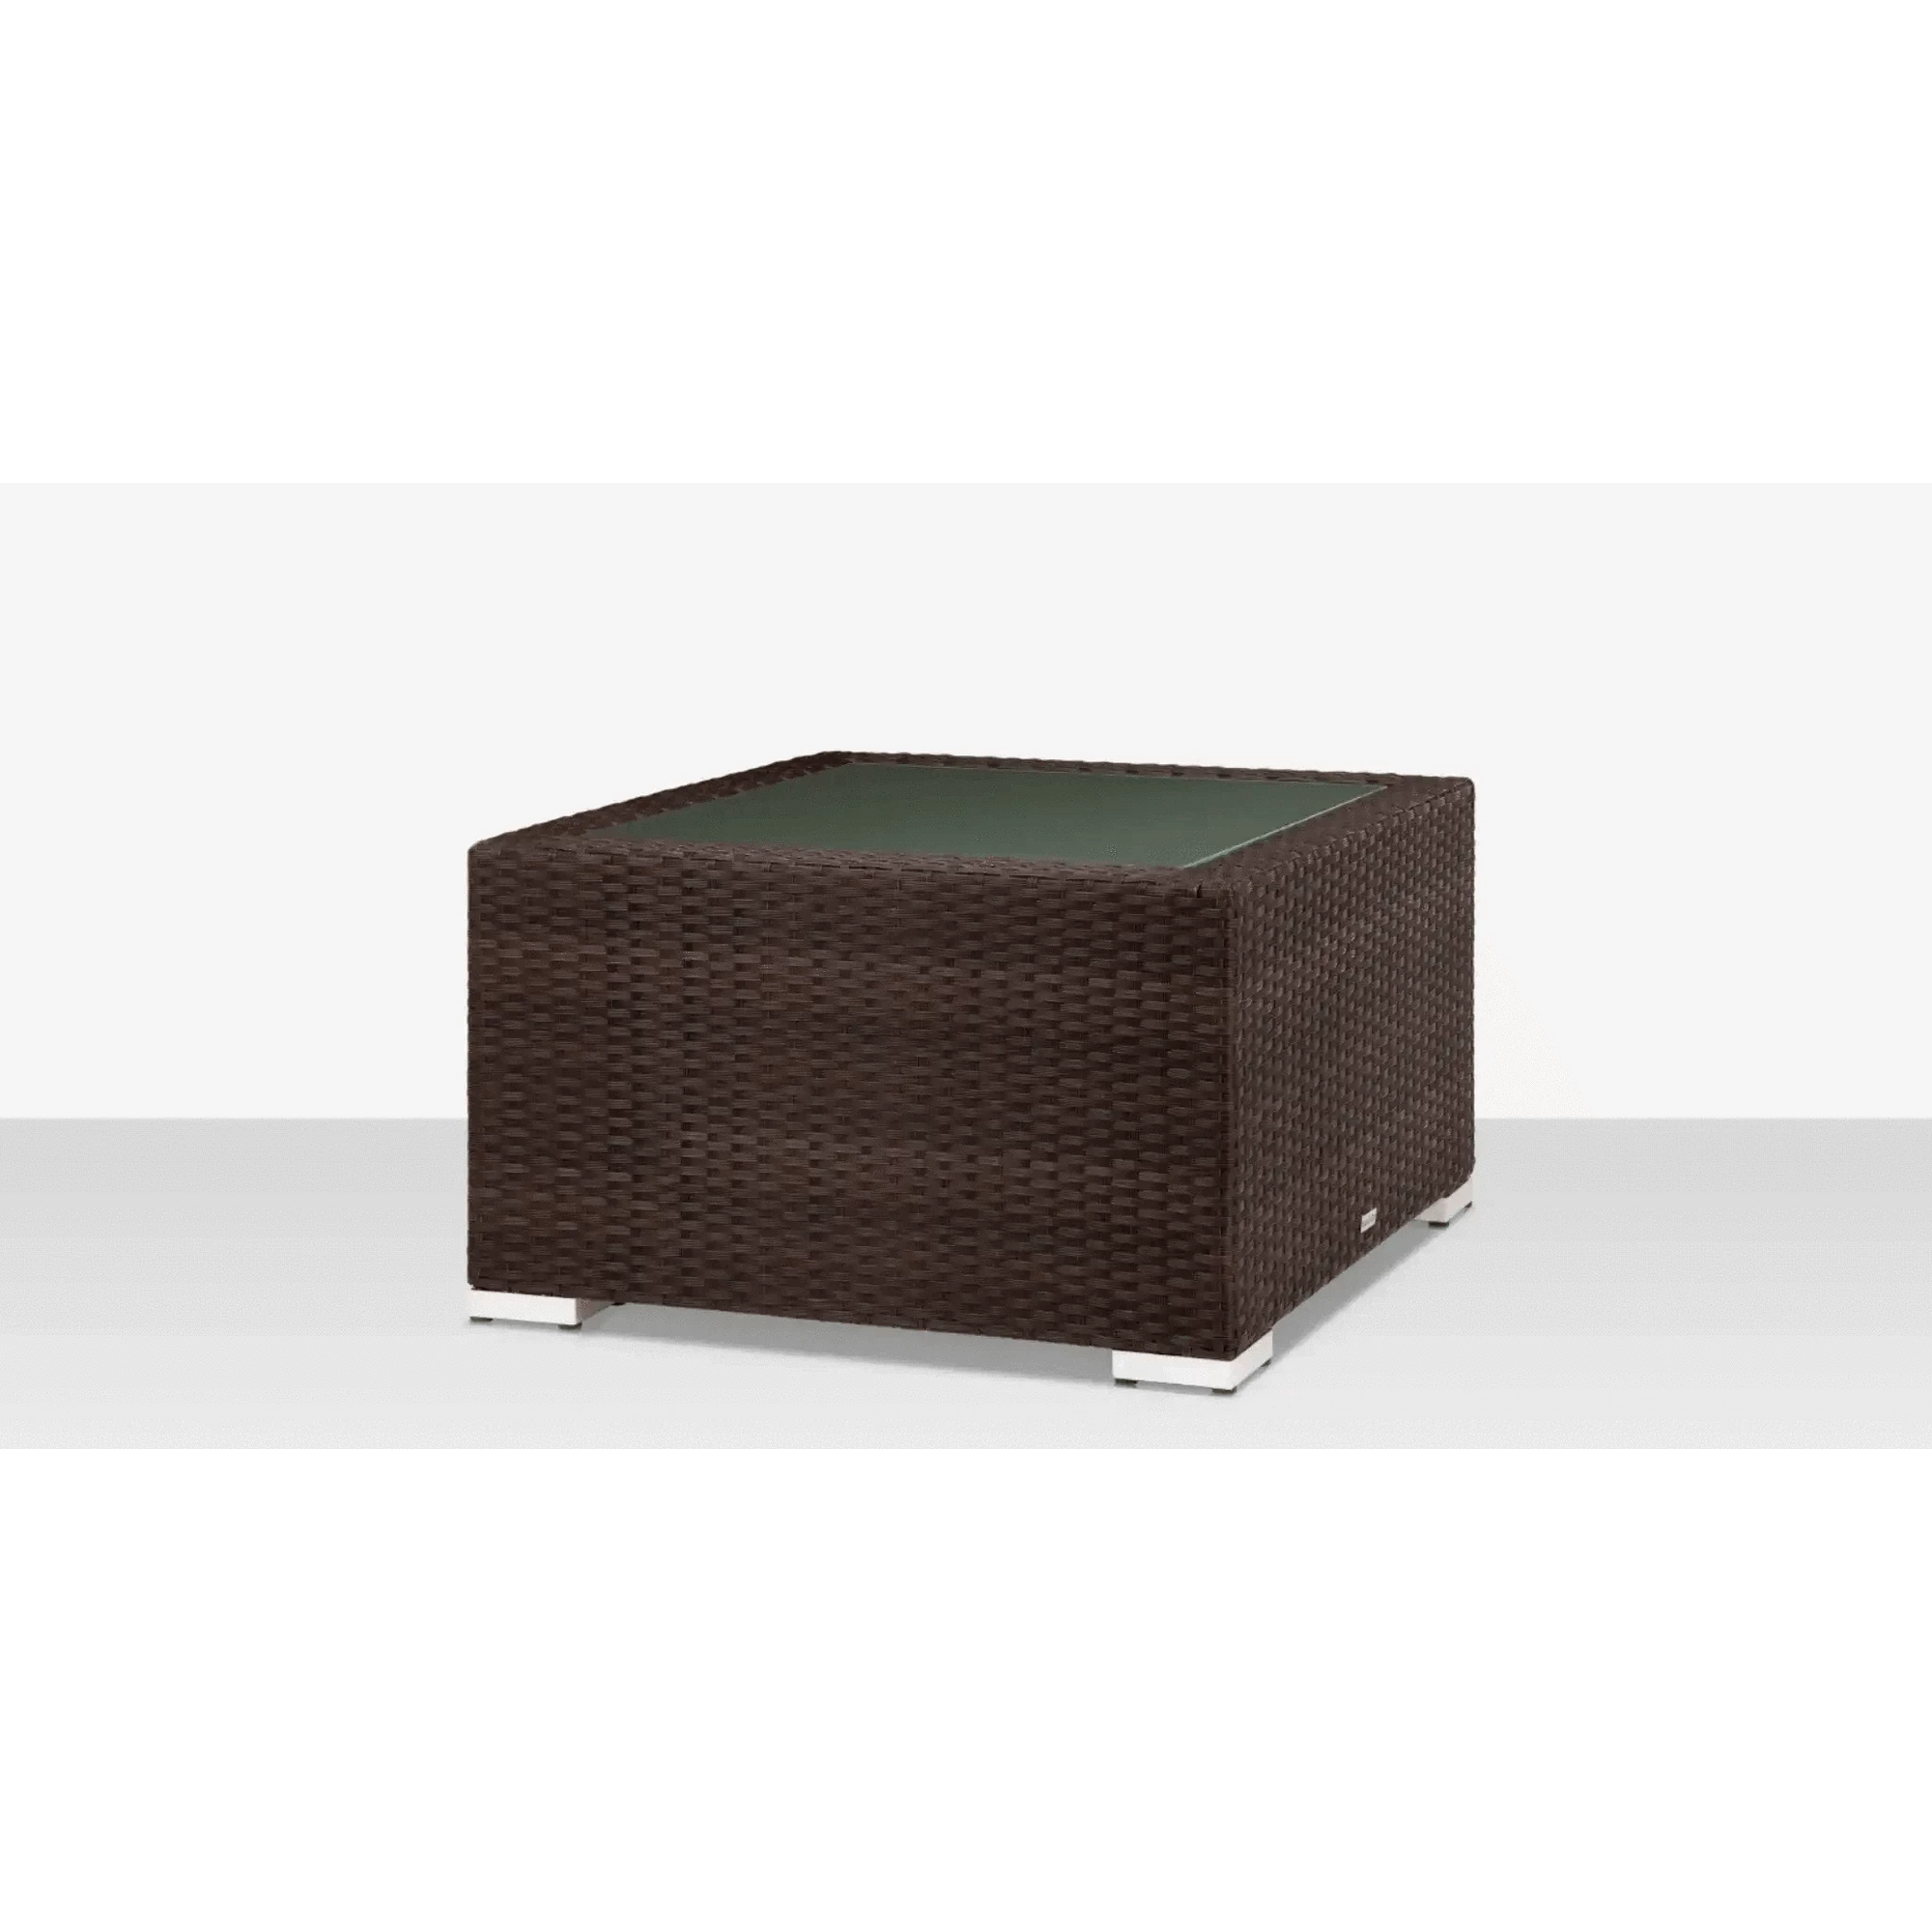 Source Furniture Lucaya Square Coffee Table-Espresso (DW)